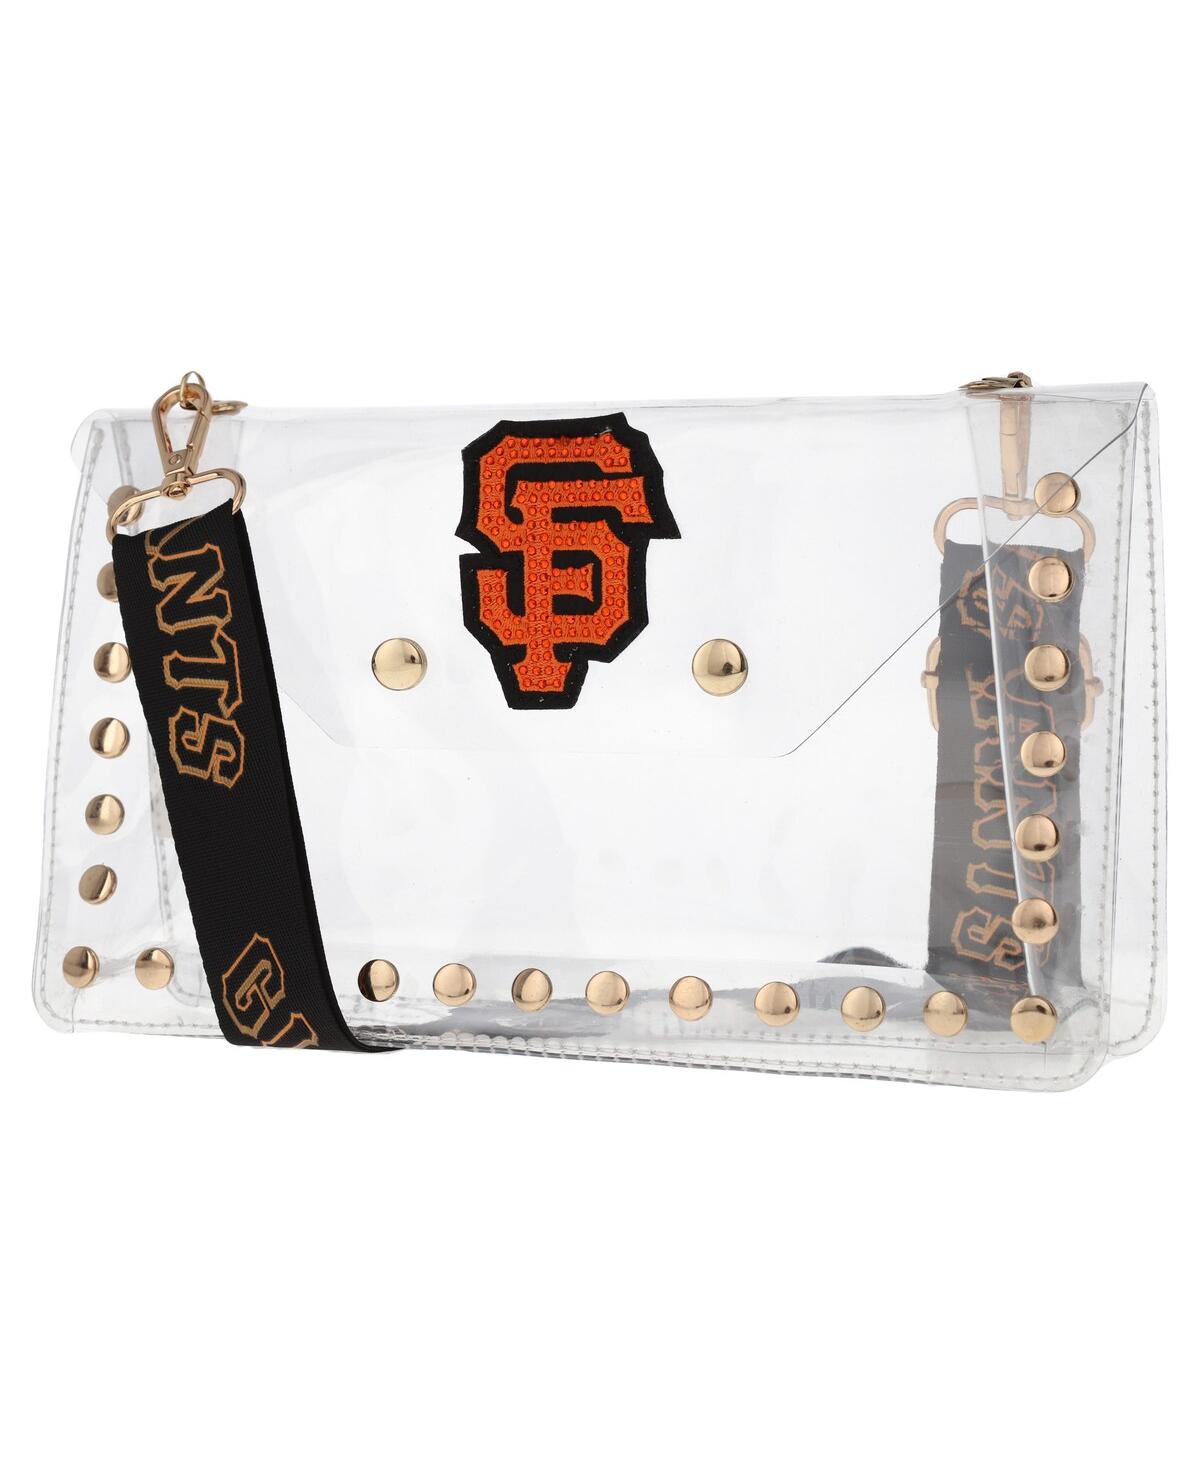 Cuce San Francisco Giants Crystal Clear Envelope Crossbody Bag In No Color